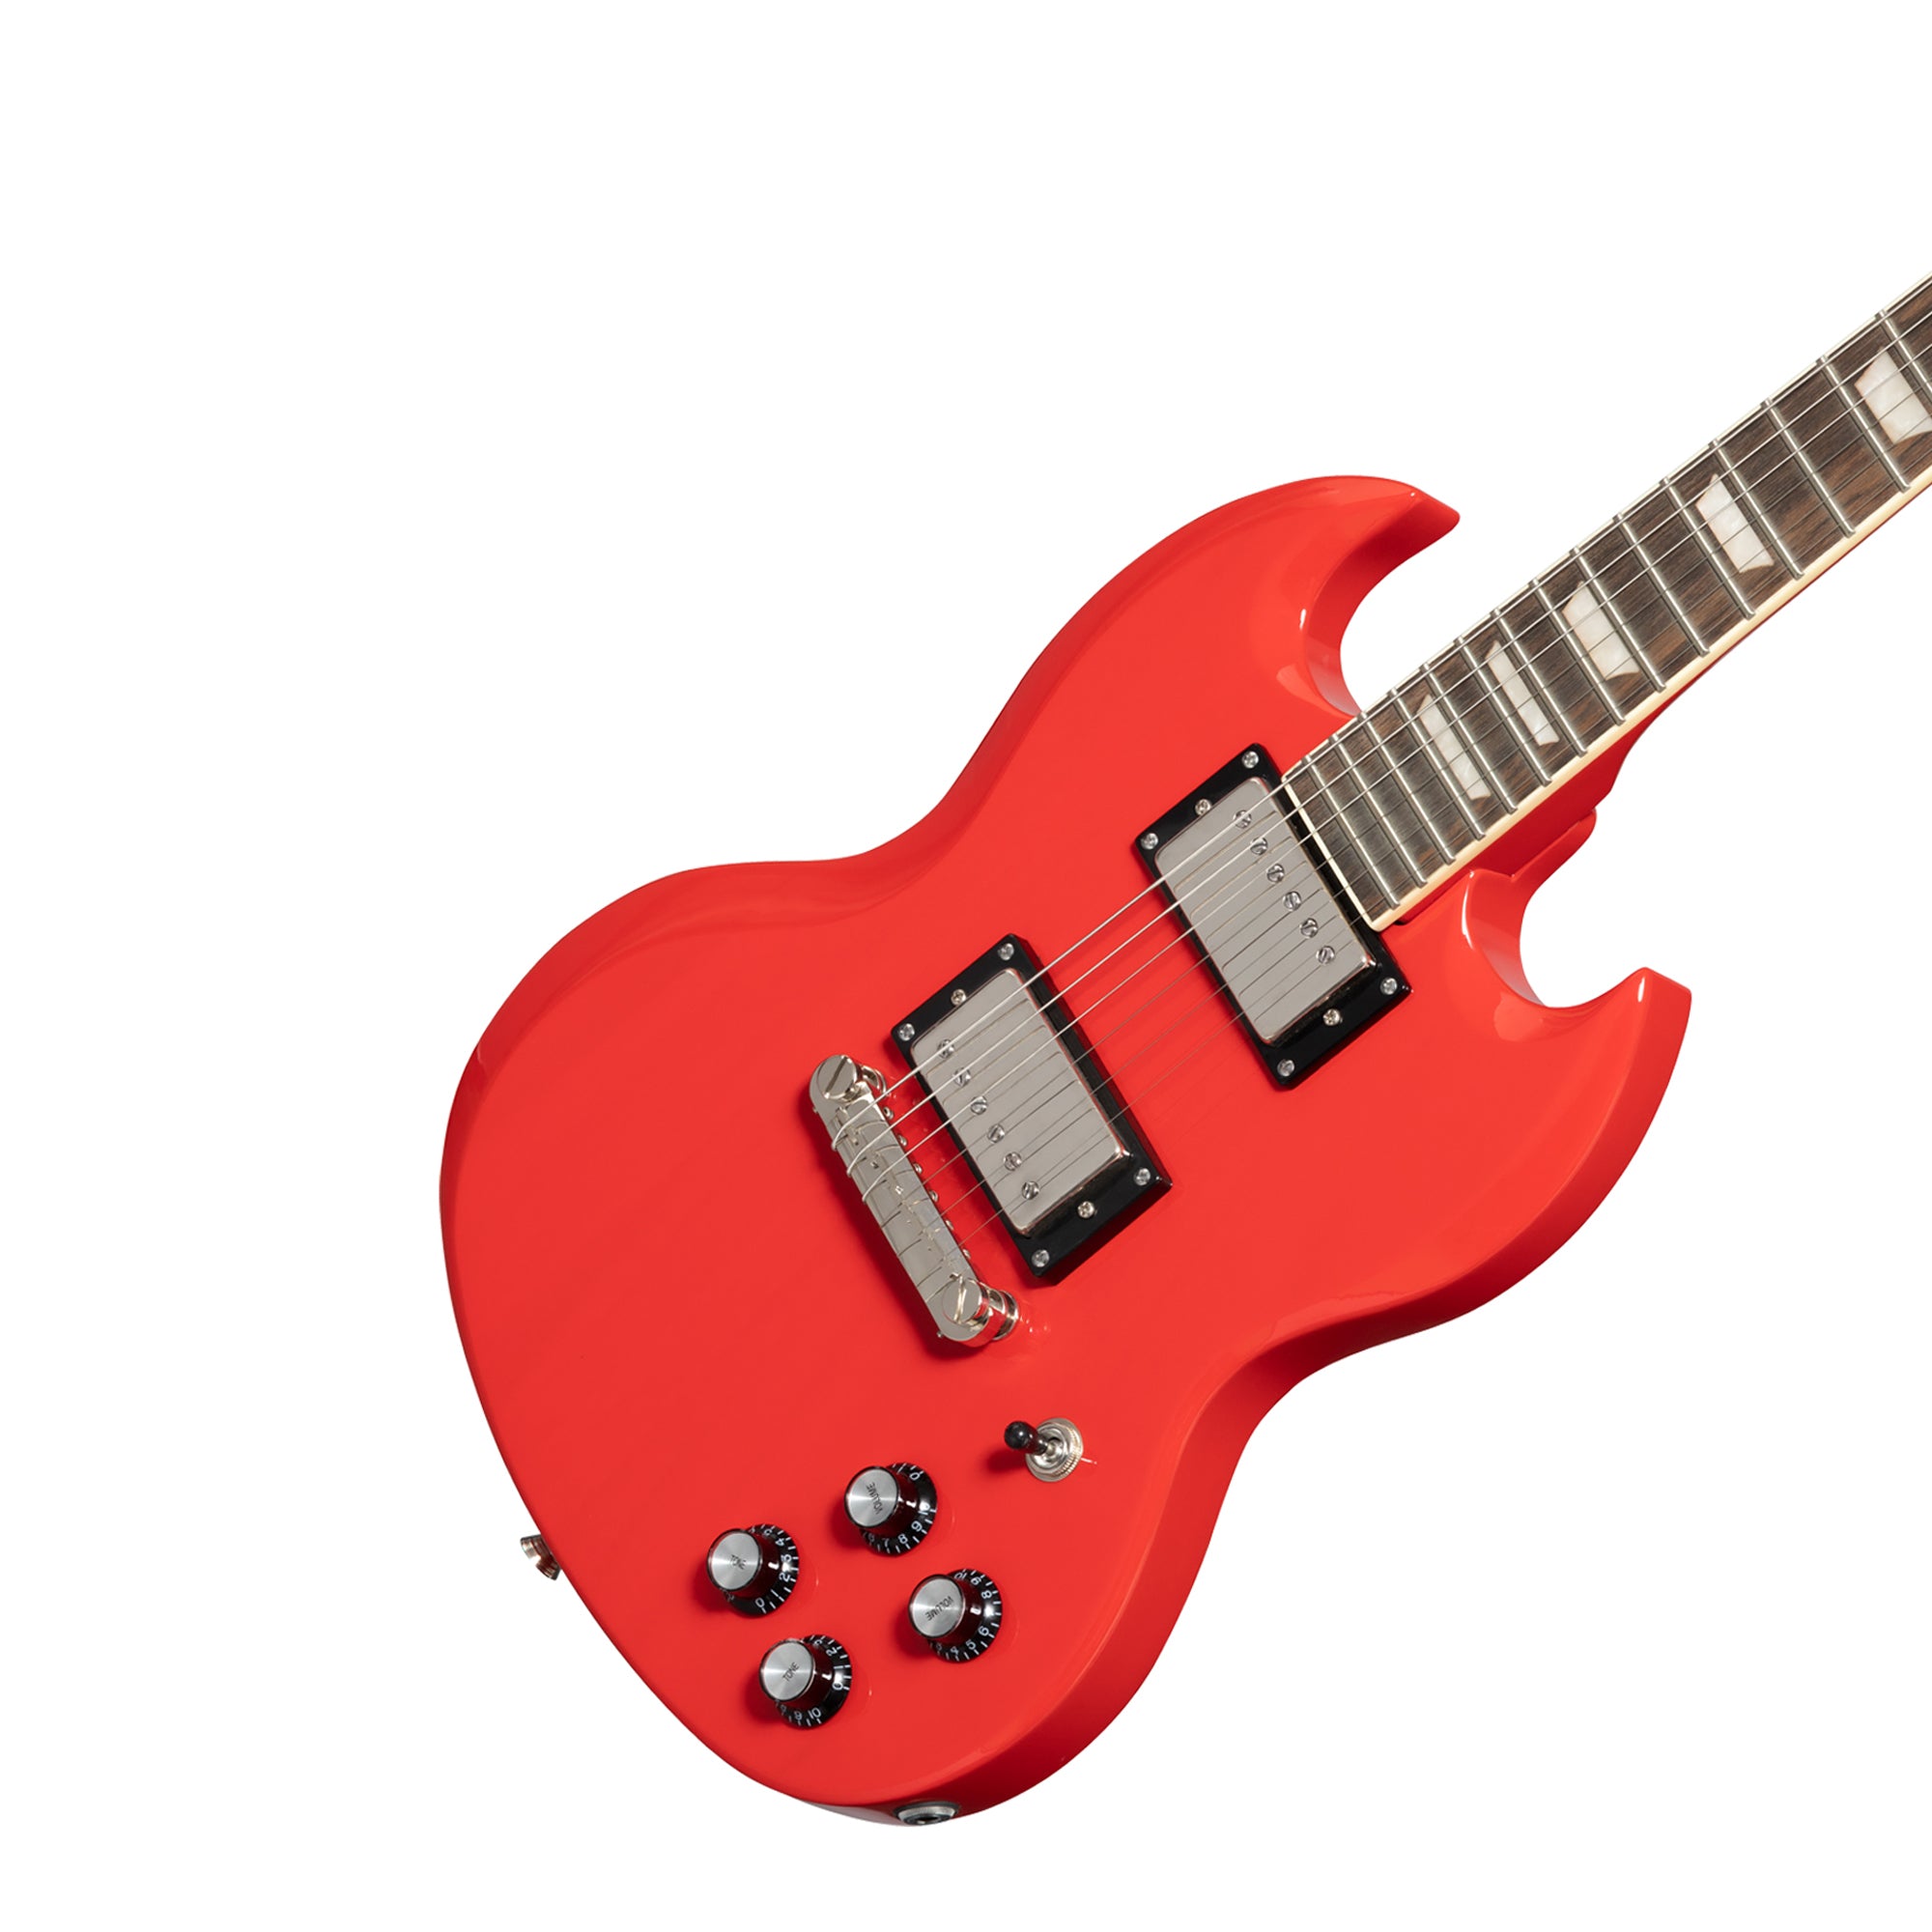 Epiphone ES1PPSGRANH1 Power Players SG Lava Red - Incl. Gig bag, Cable, Picks